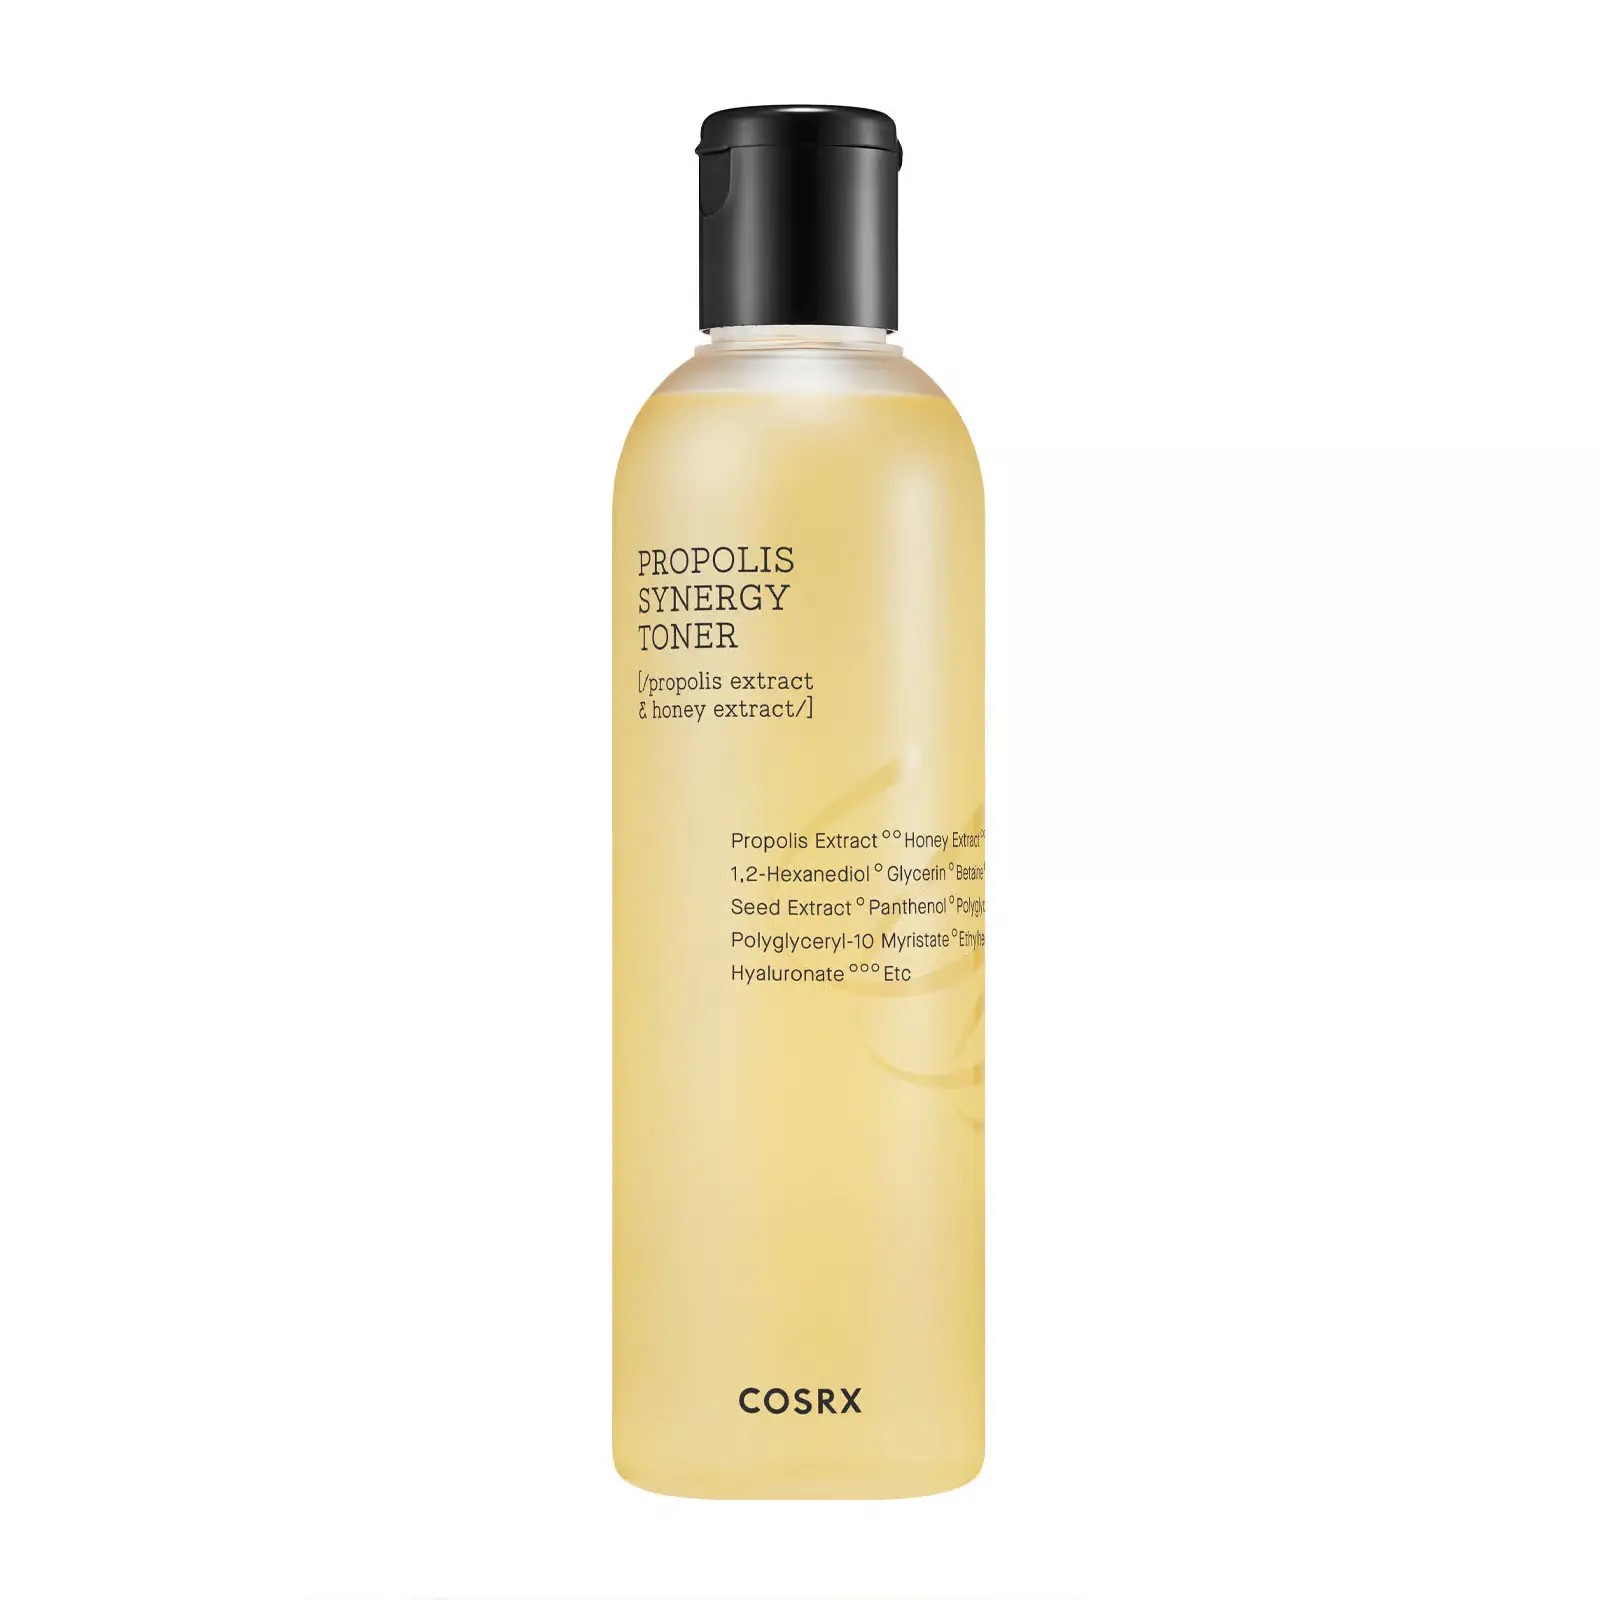 COSRX Full fit Propolis Synergy Toner 150ml Discounts and Cashback